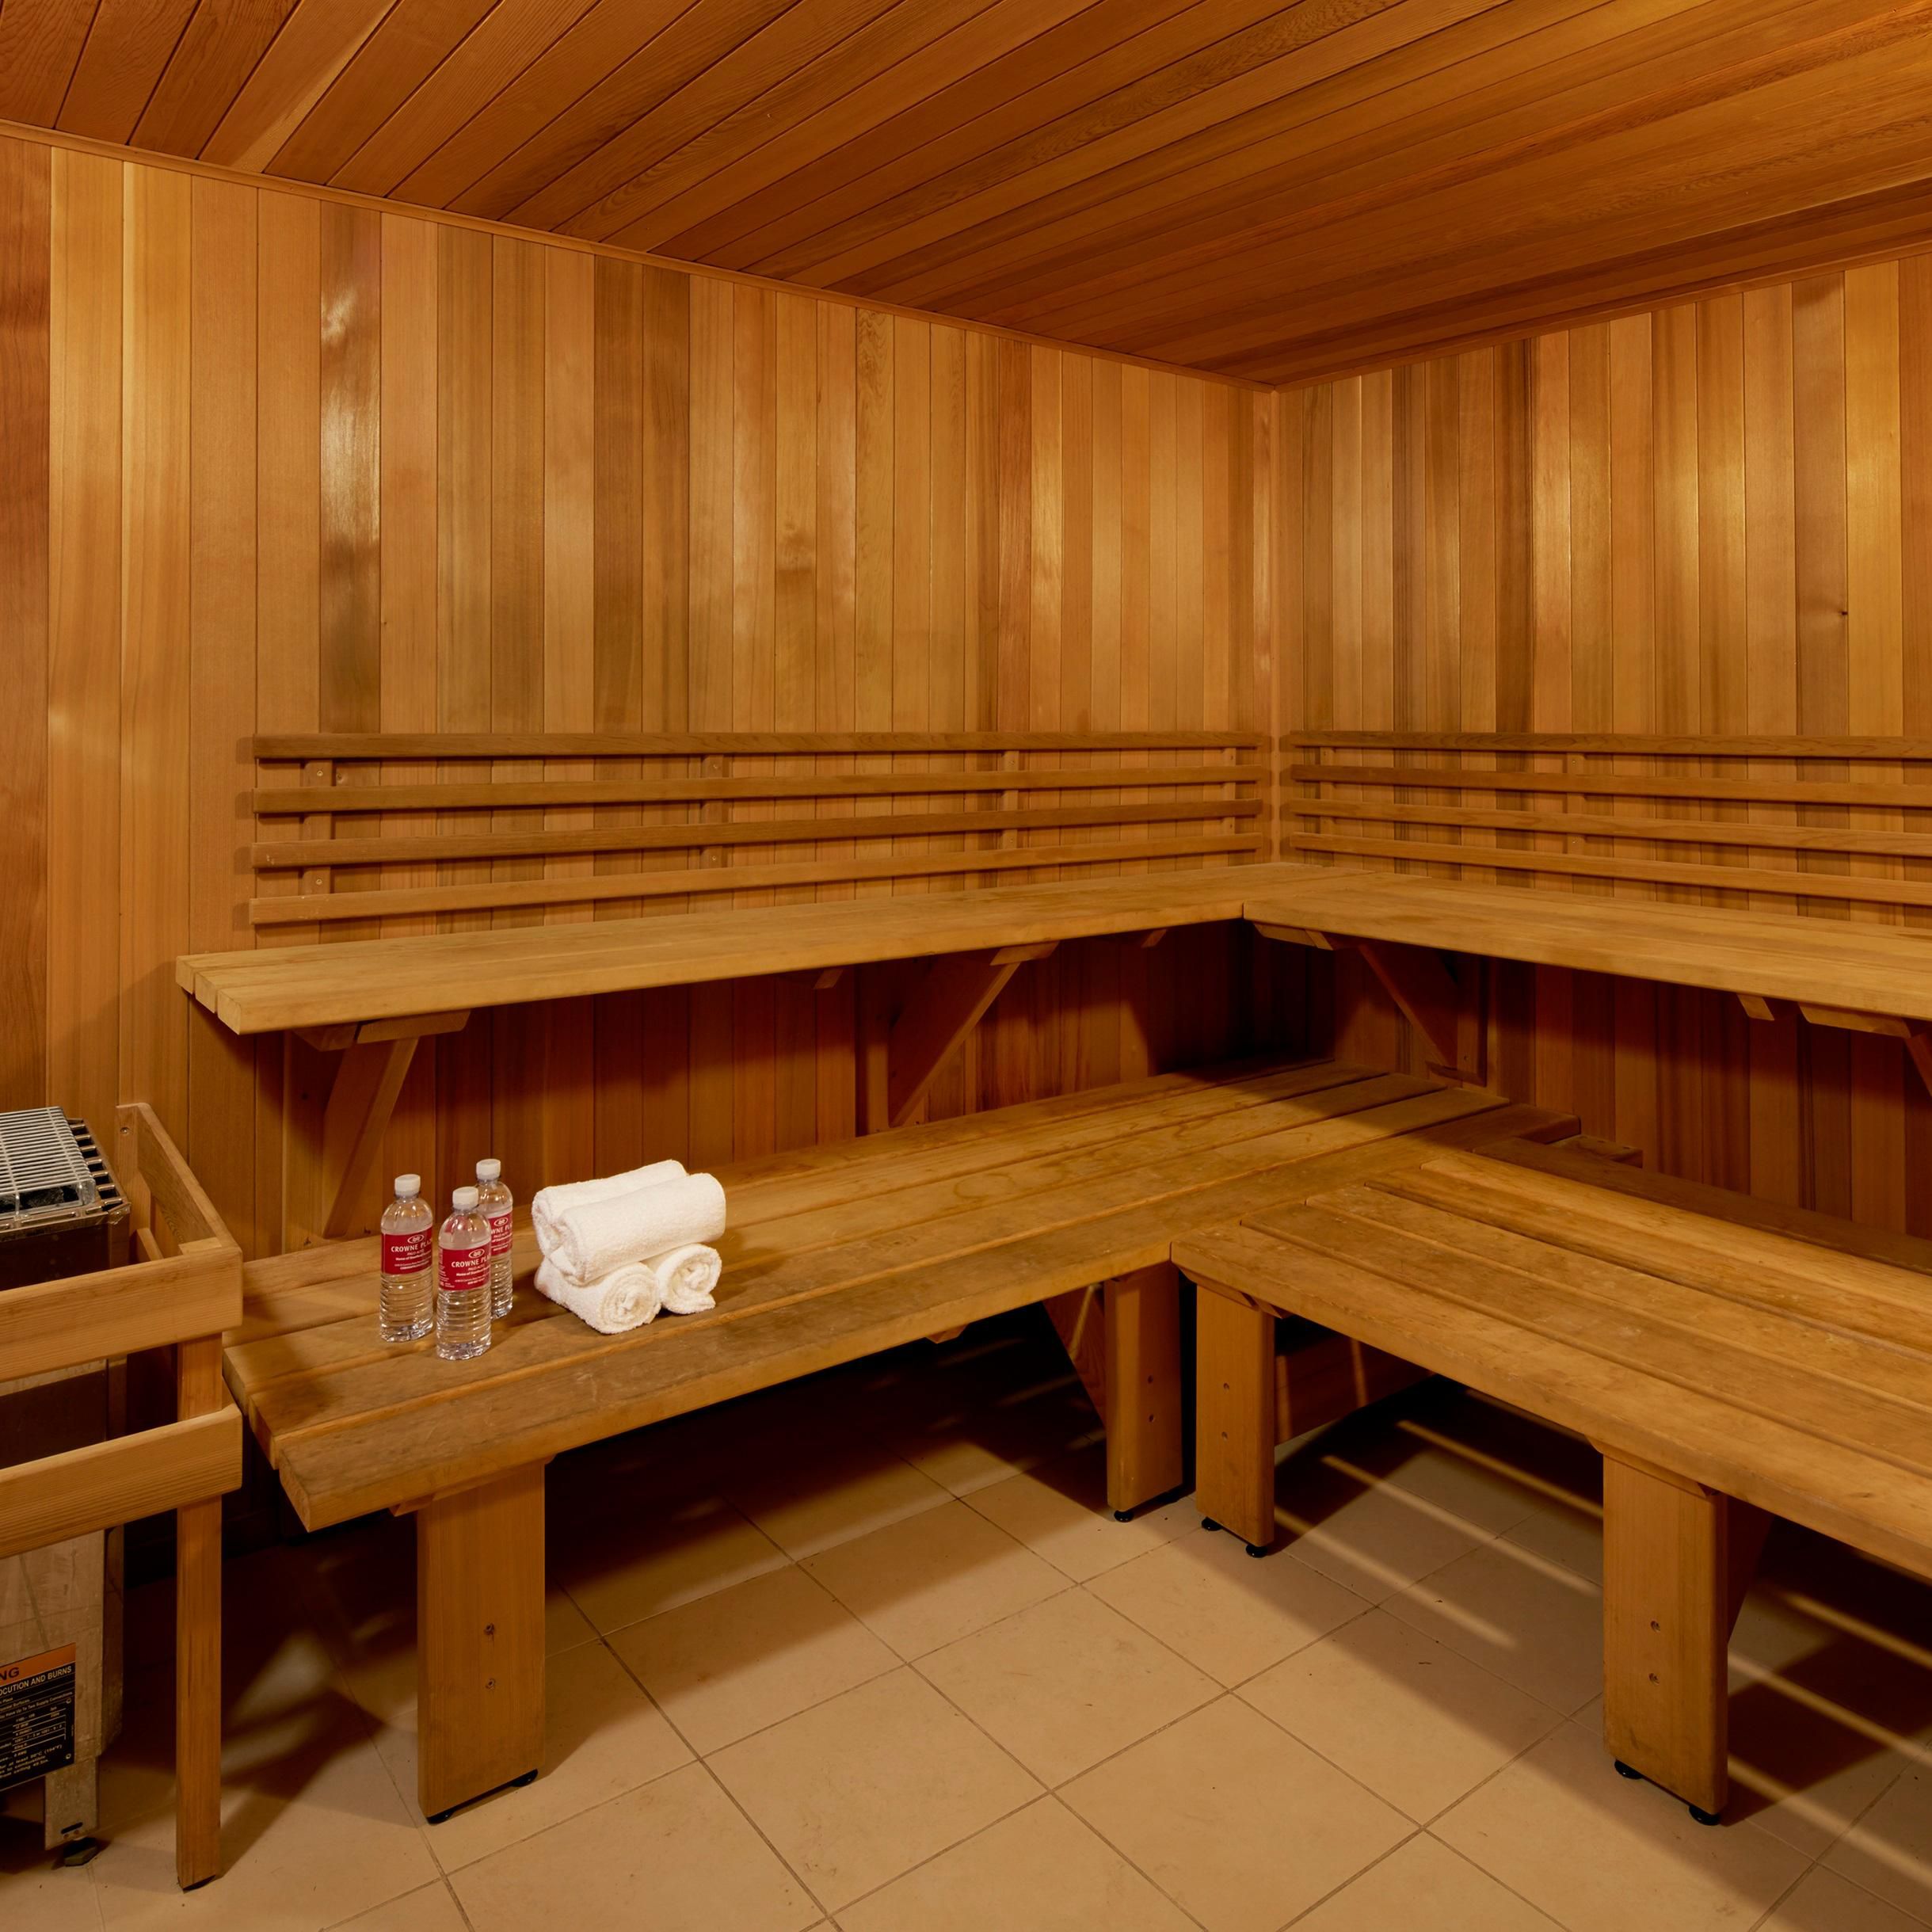 Treat yourself to the Sauna after a successful workout in the gym